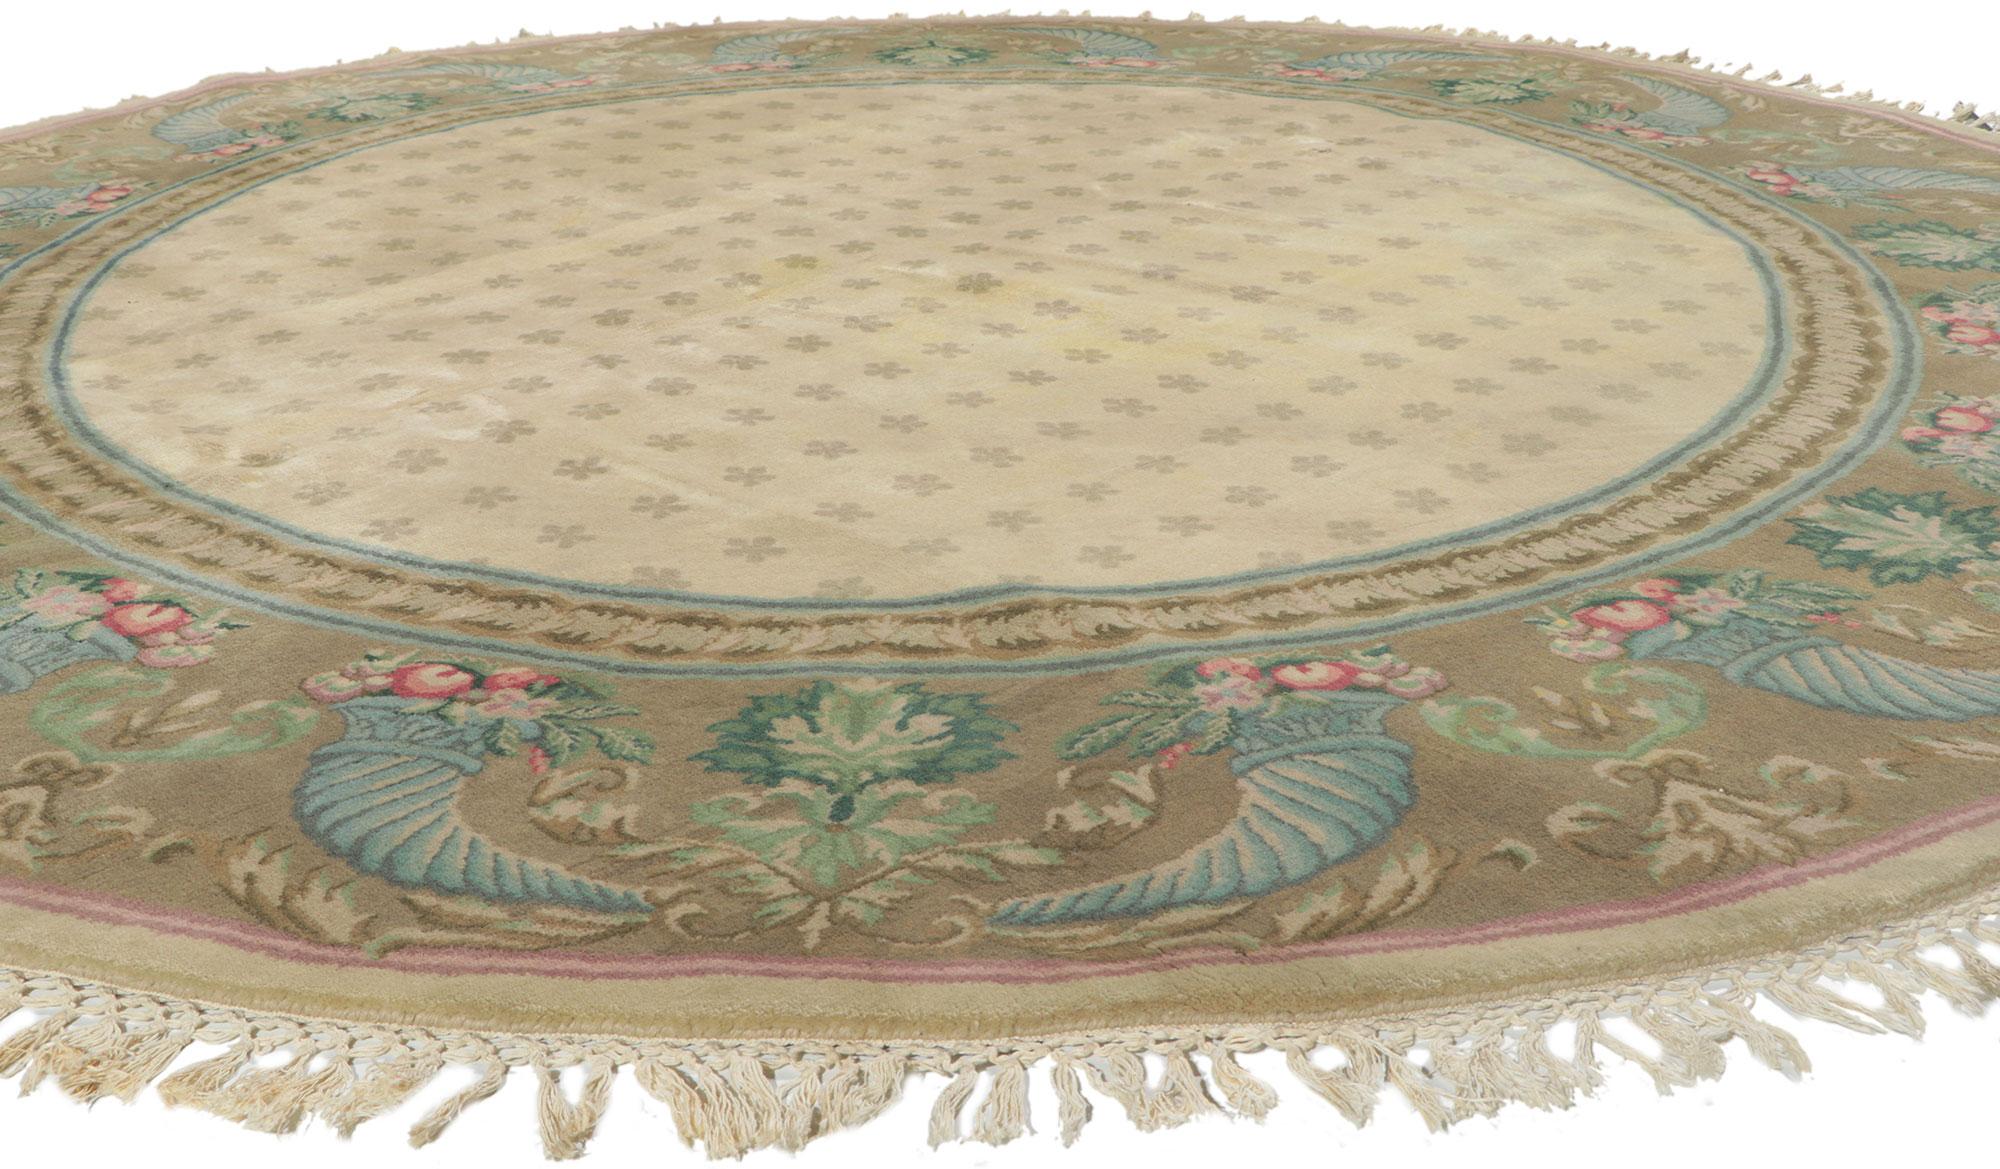 74754 Vintage Round Indian rug with Traditional Style 08'02 x 08'02. This hand-knotted wool vintage round Indian rug features a traditional style composed of a repeating geometric pattern. It is enclosed with a timeless cornucopia border. The